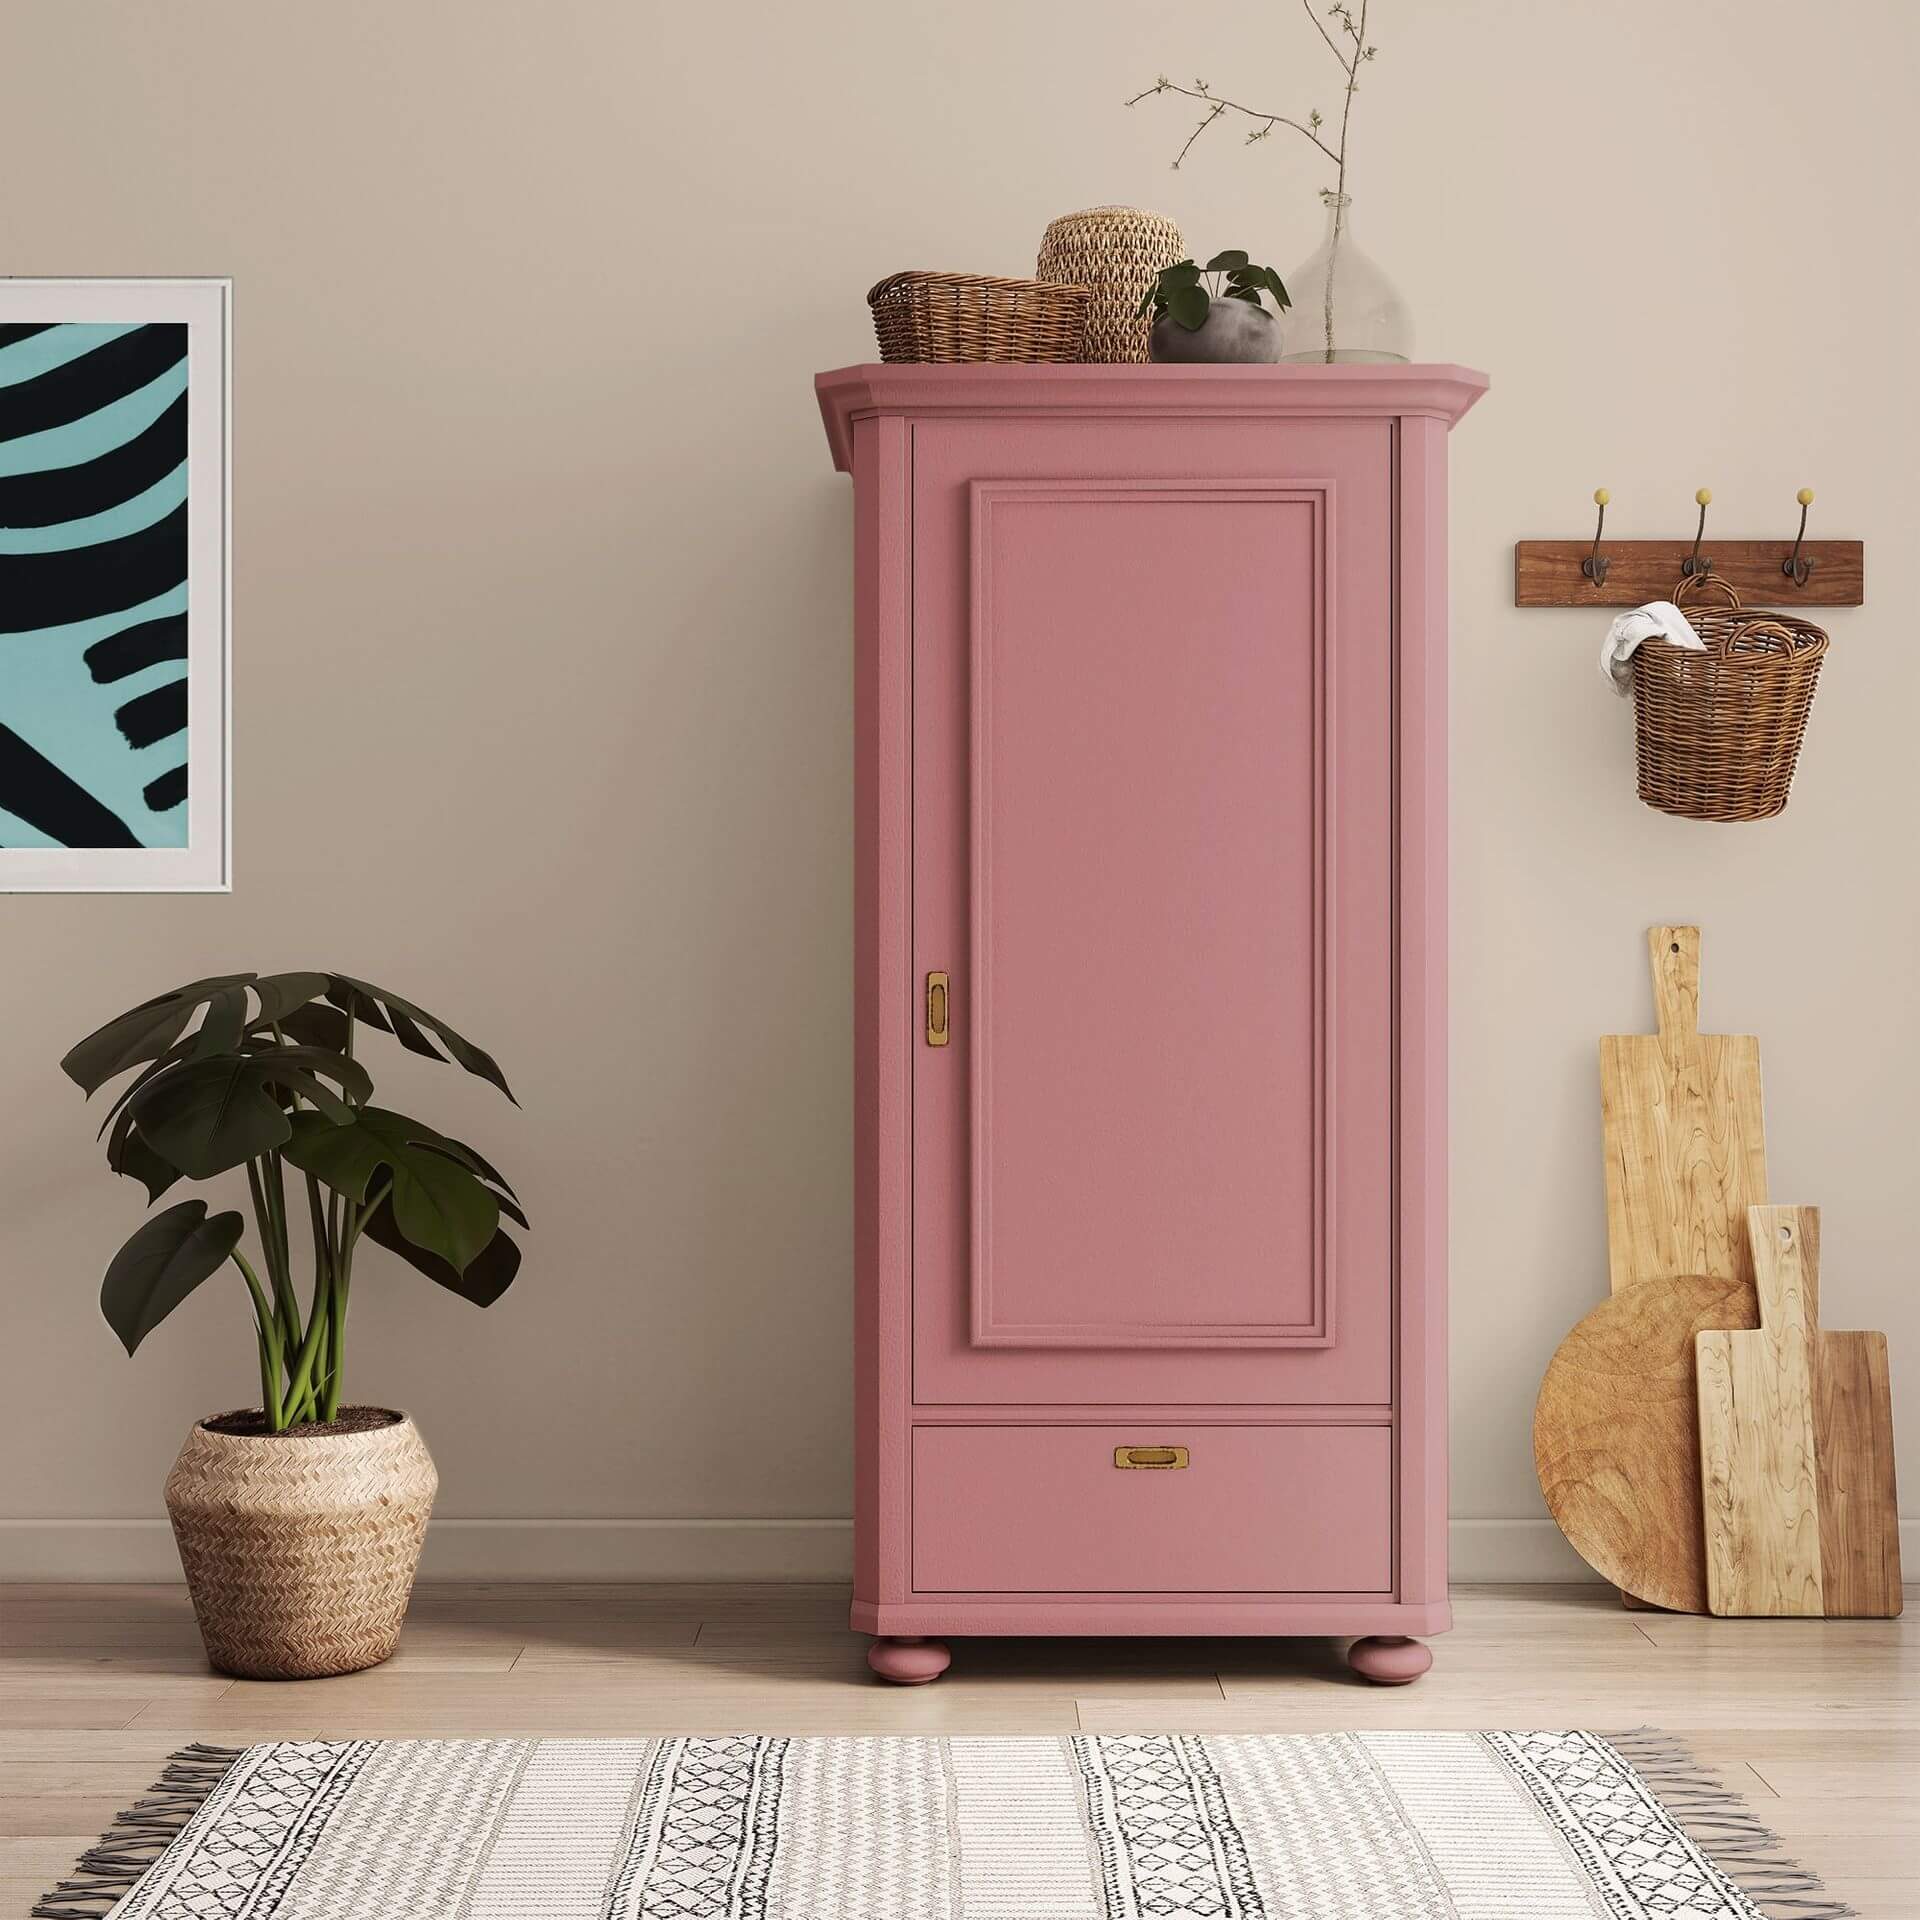 MissPompadour Pink with Grey - The Valuable Wall Paint 1L